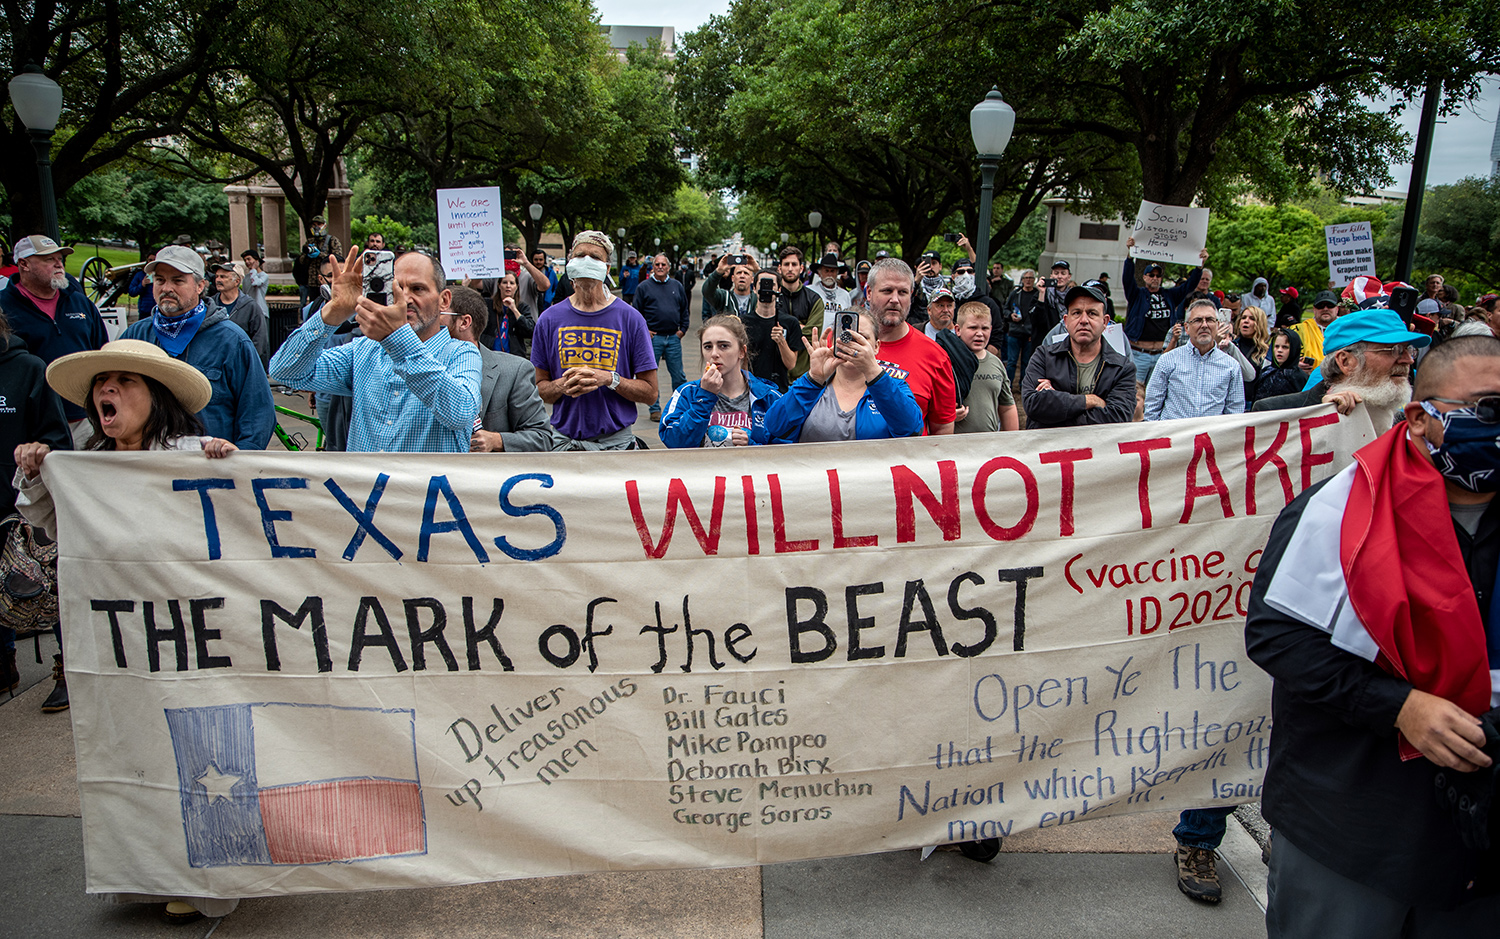 https://img.texasmonthly.com/2020/04/covid-protests-austin.jpg